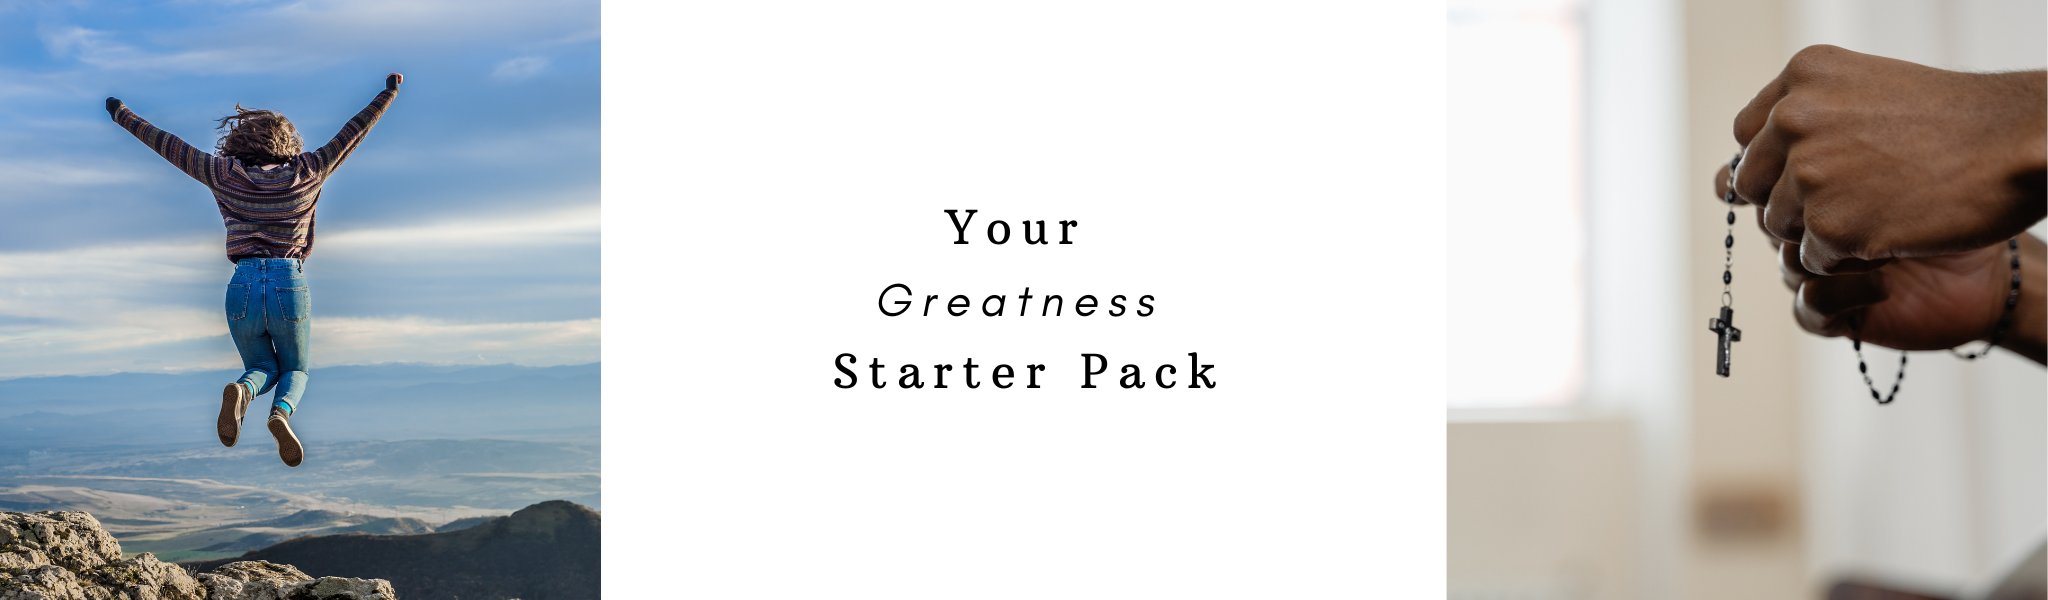 A woman jumping and a person praying surround the words "Your Greatness Starter Pack"